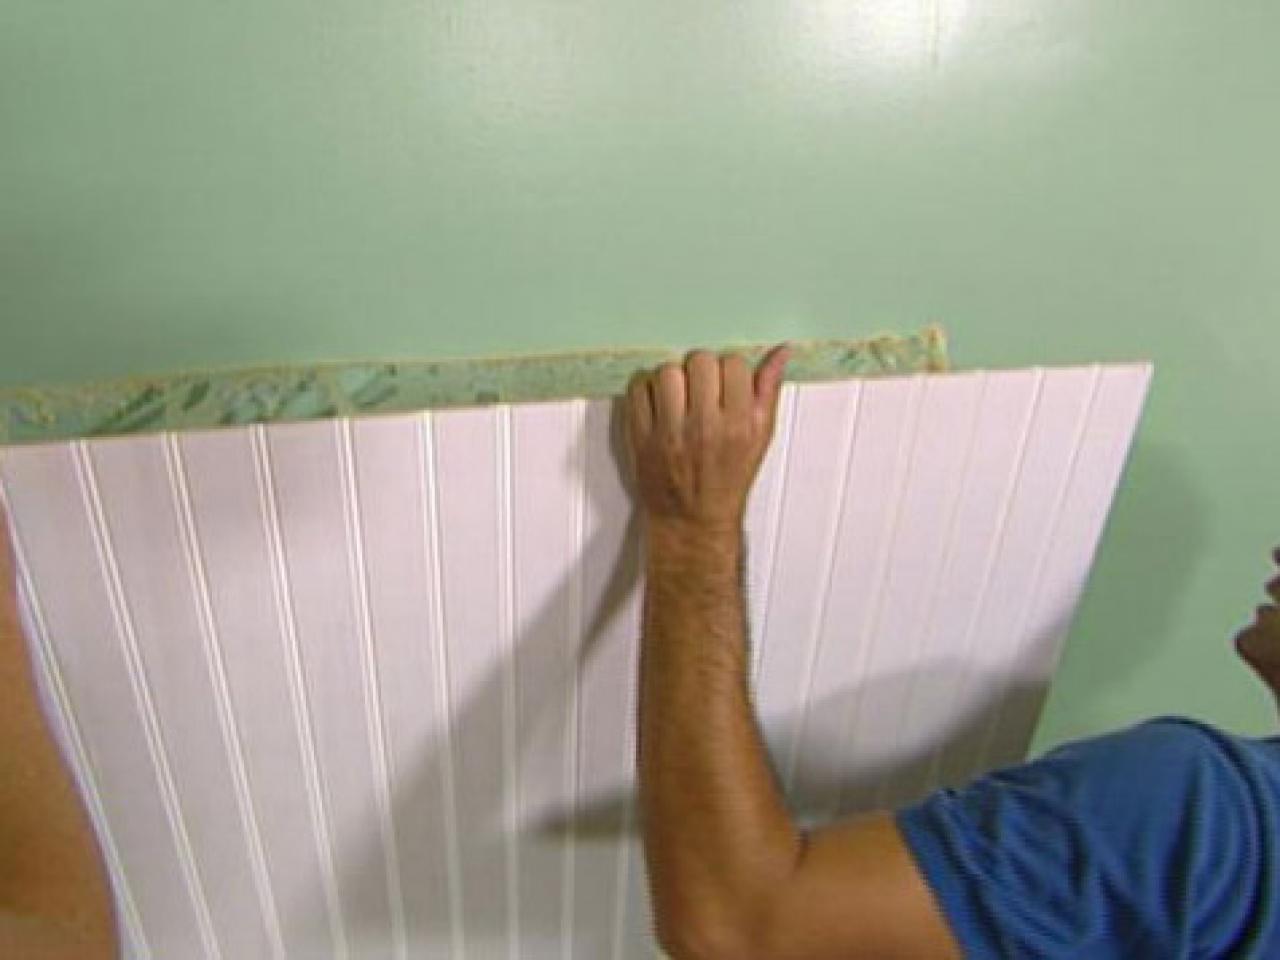 How To Install Wainscoting Panels In Bathroom - Bathroom Poster